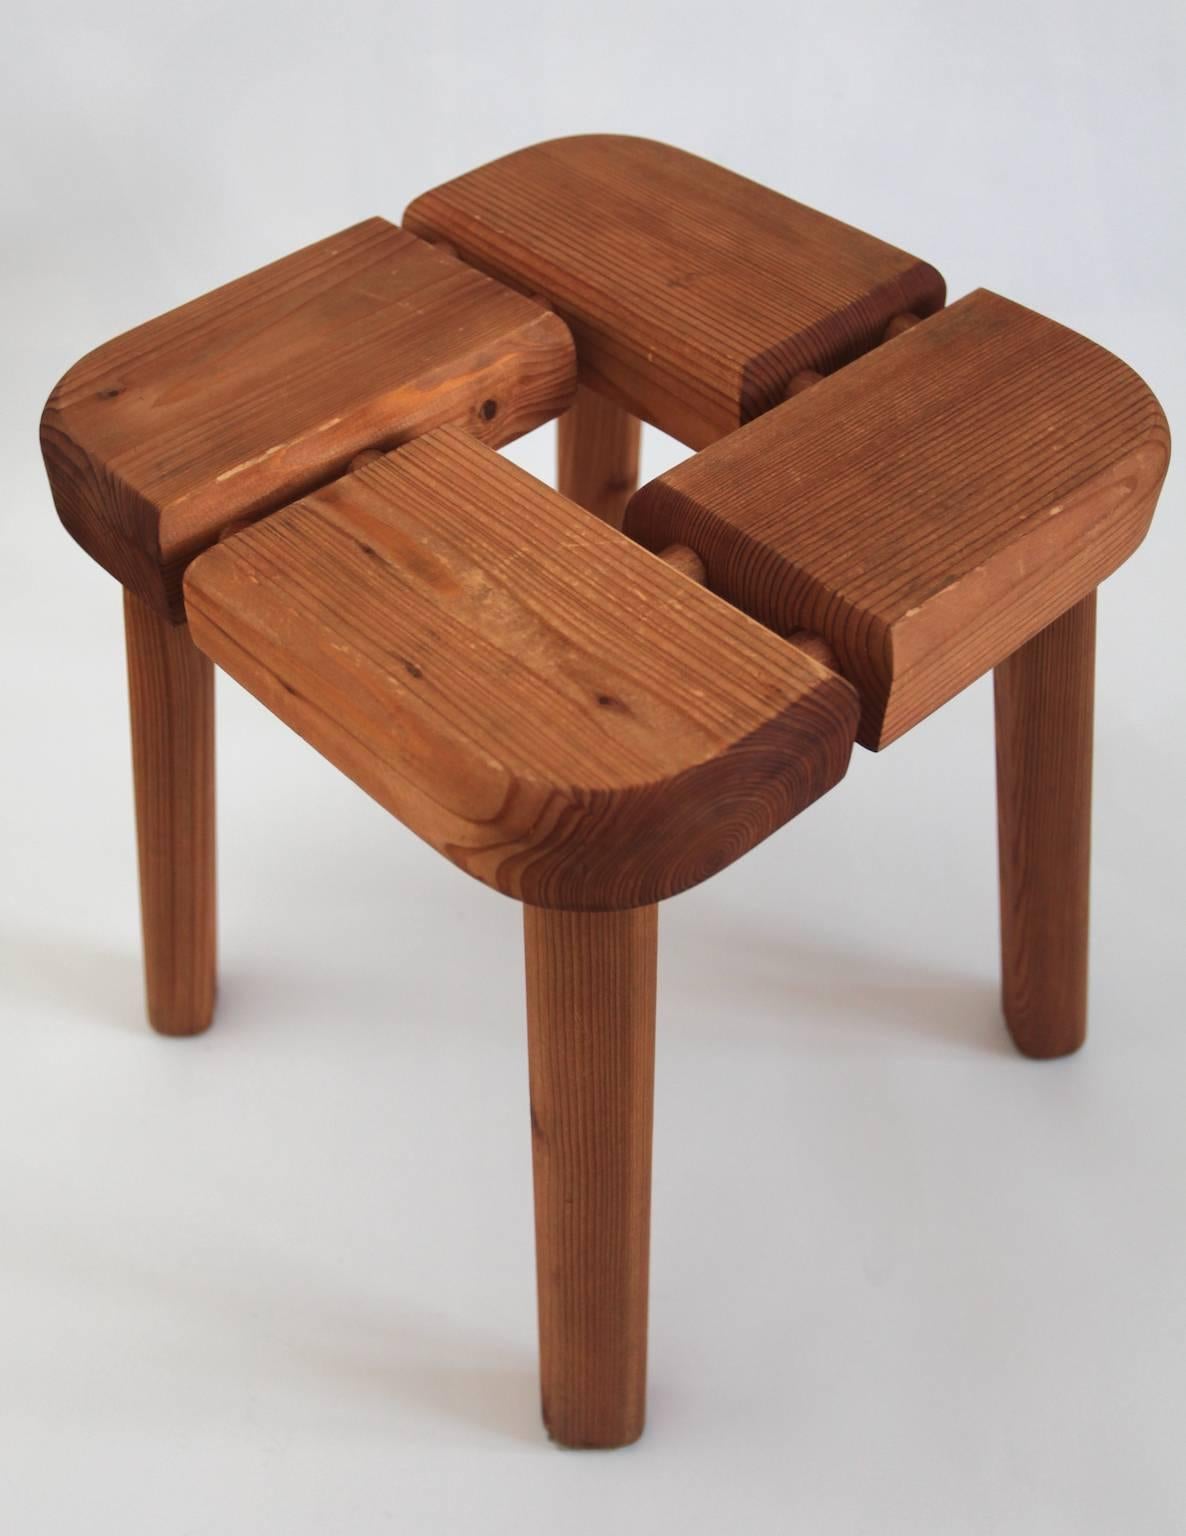 A charming pine stool by Lisa Johansson Pape, found in the stable after a number of years. According to the family this stool was a part of a larger set with table and chairs, but this stool was forgotten and placed in the stable for a number of